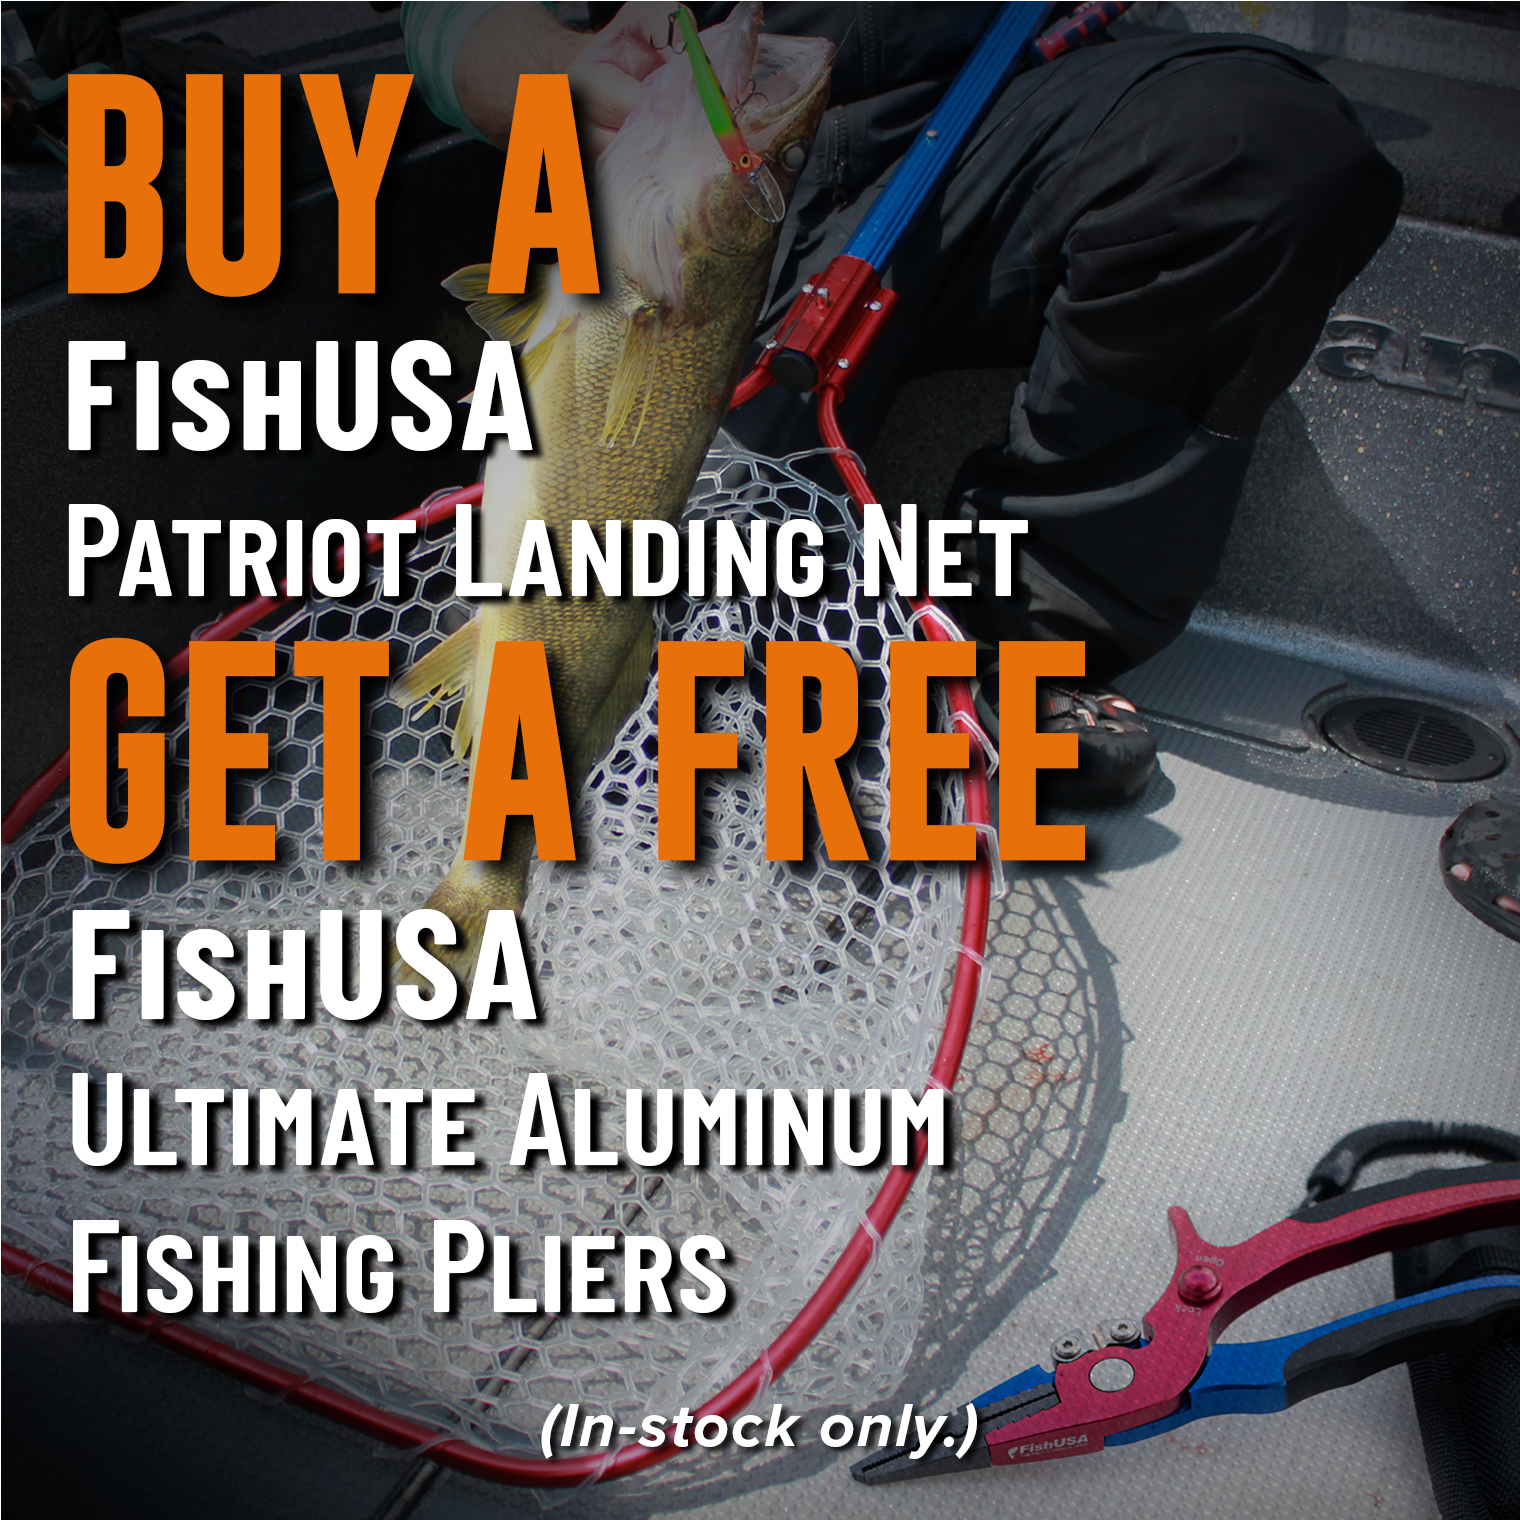 Buy A FishUSA Patriot Landing Net Get A Free FishUSA Ultimate Aluminum Fishing Pliers (In-stock only.)